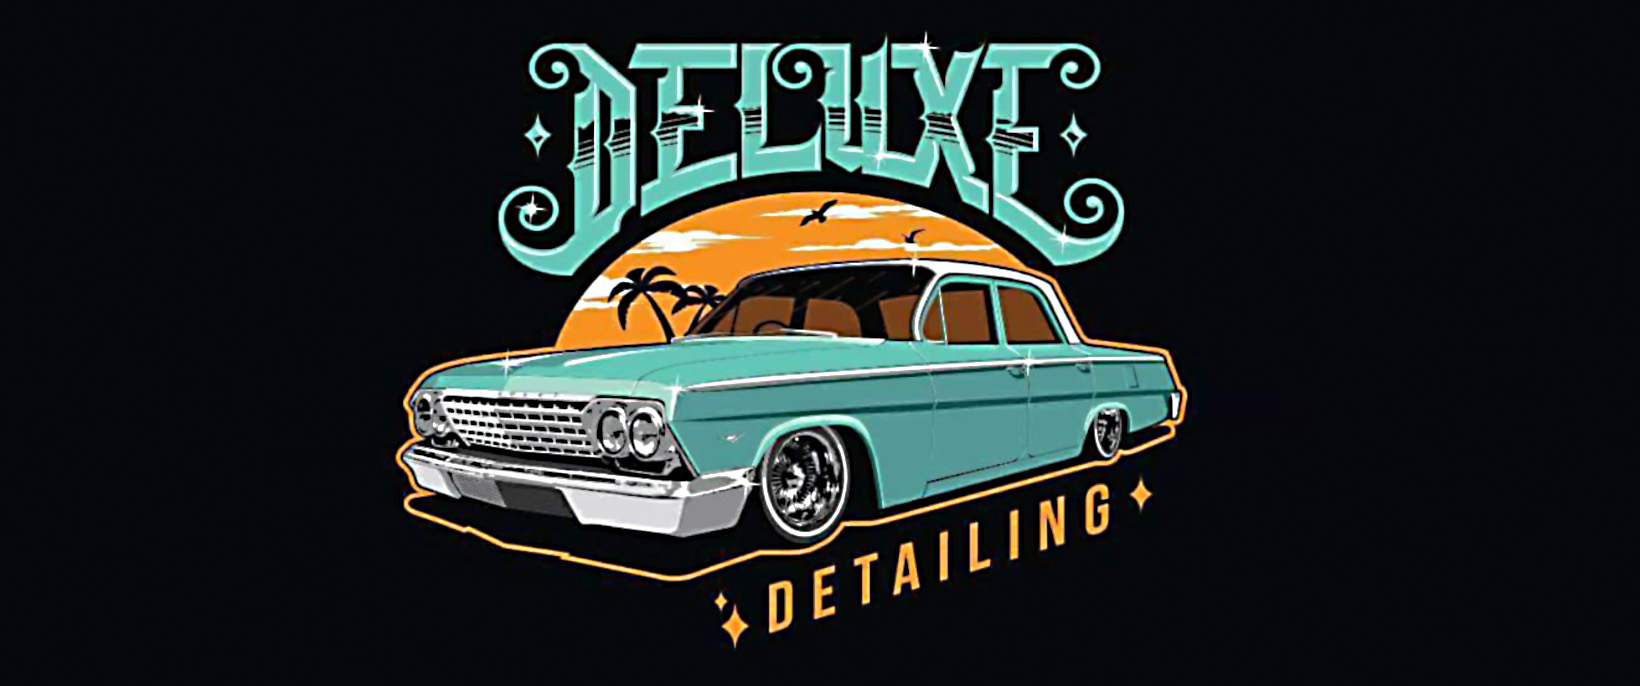 Deluxe Detailing – Car Detailing & Paint Protection